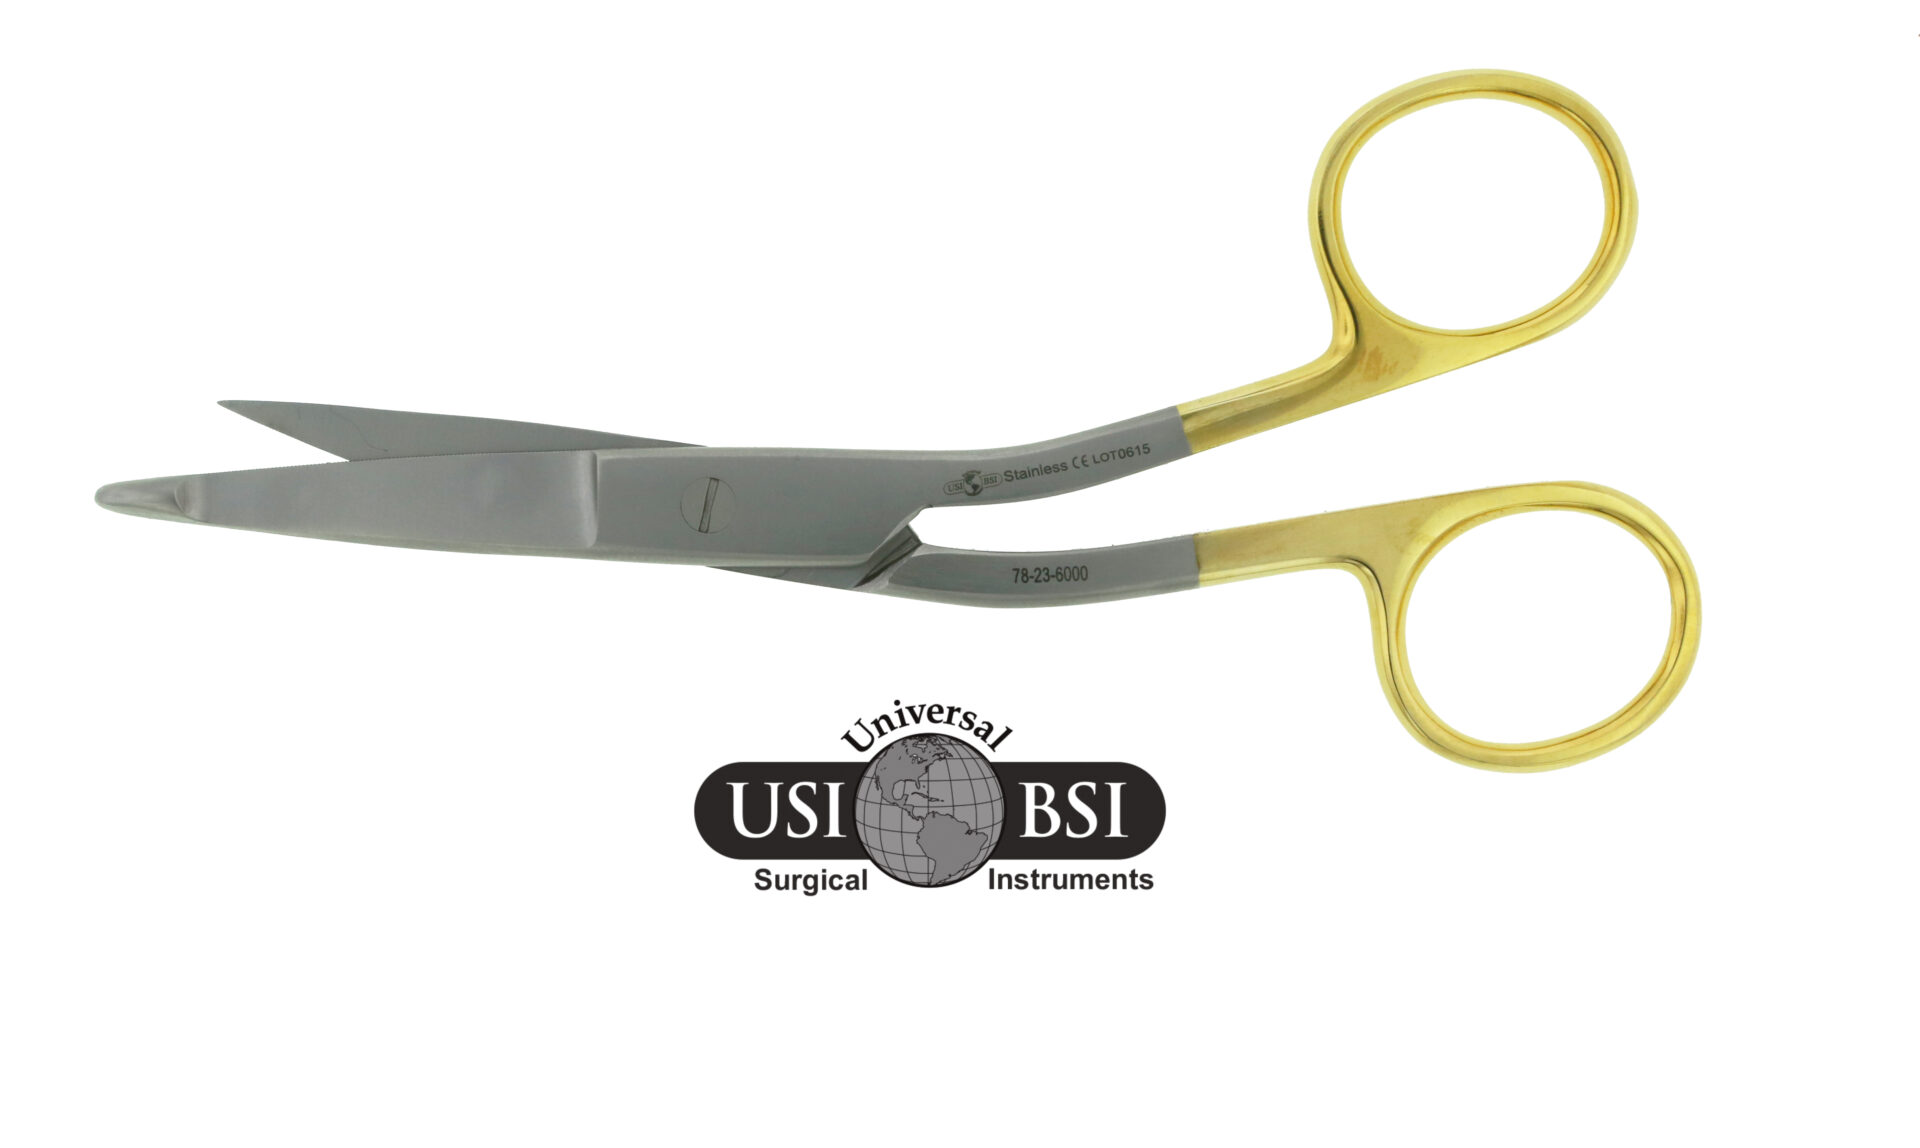 A pair of scissors with yellow handles and grey handles.